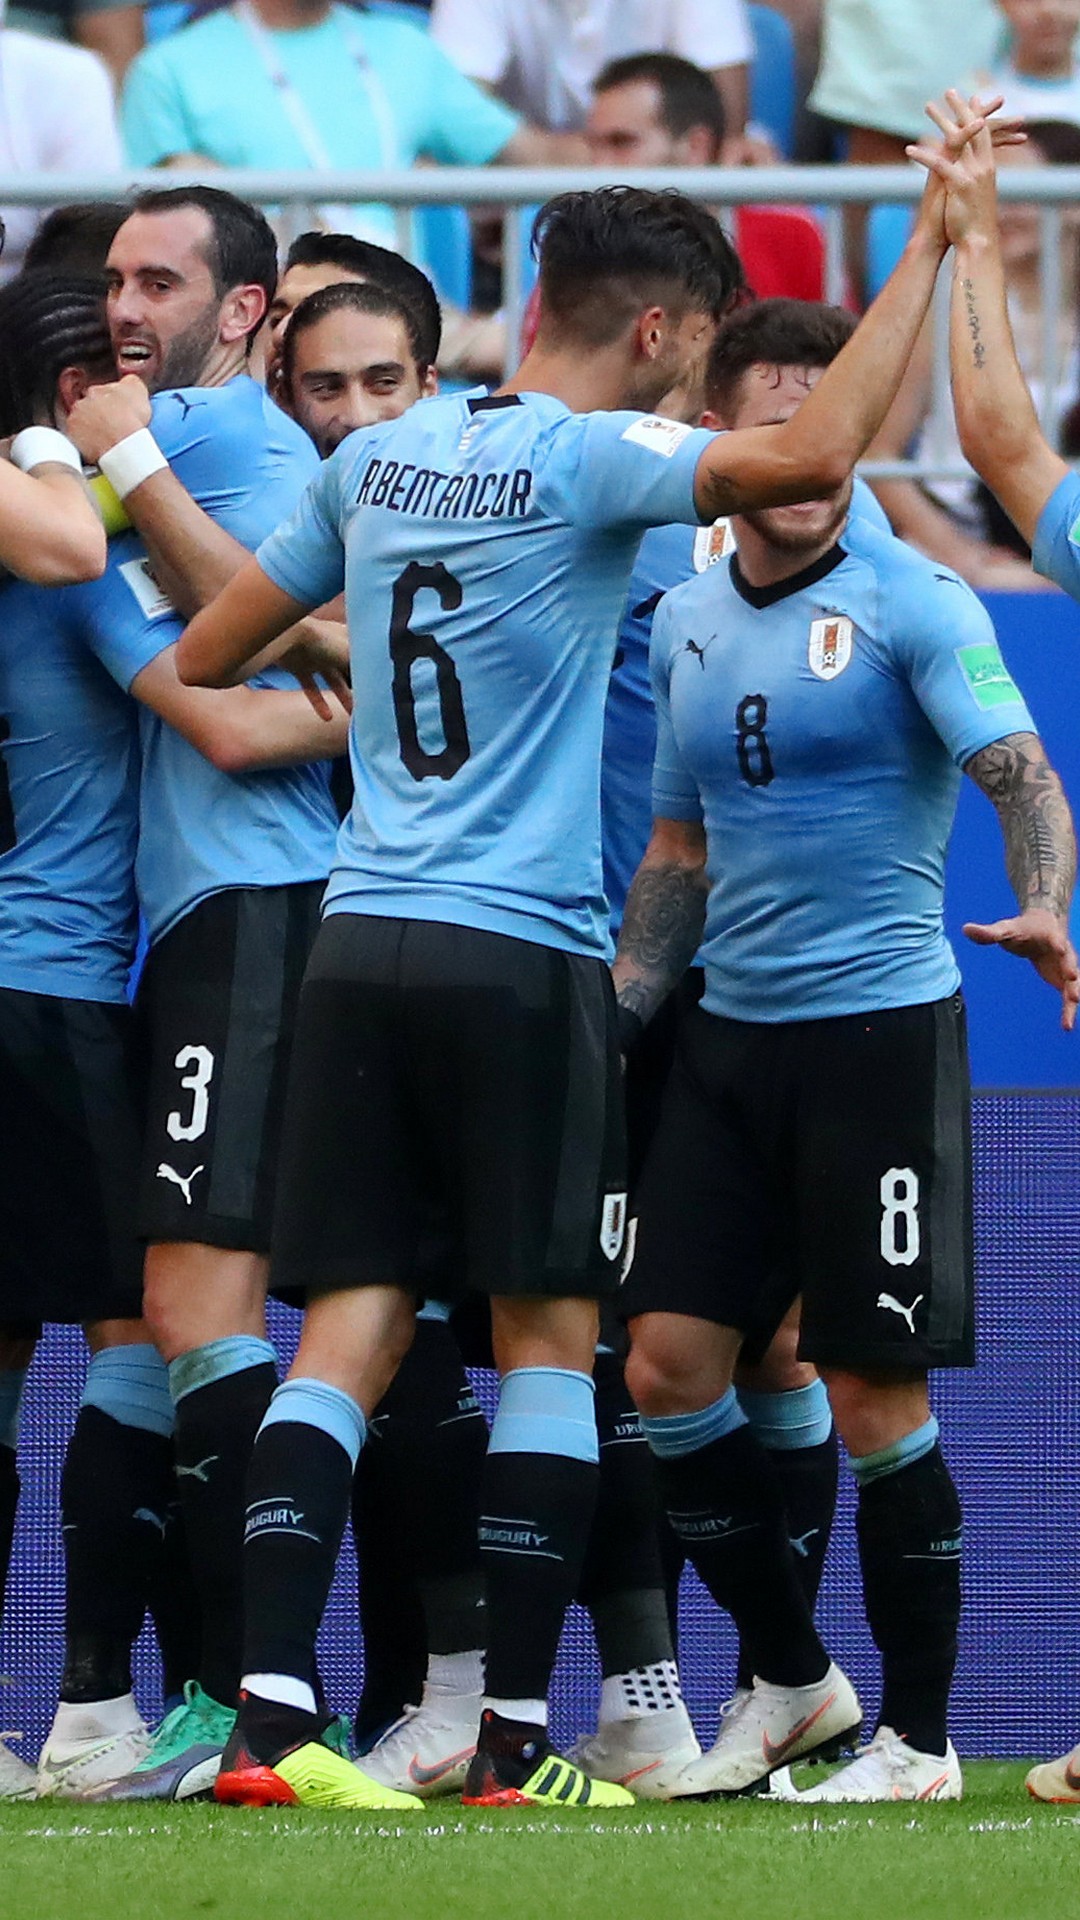 Wallpaper Uruguay National Team Android with image resolution 1080x1920 pixel. You can make this wallpaper for your Android backgrounds, Tablet, Smartphones Screensavers and Mobile Phone Lock Screen